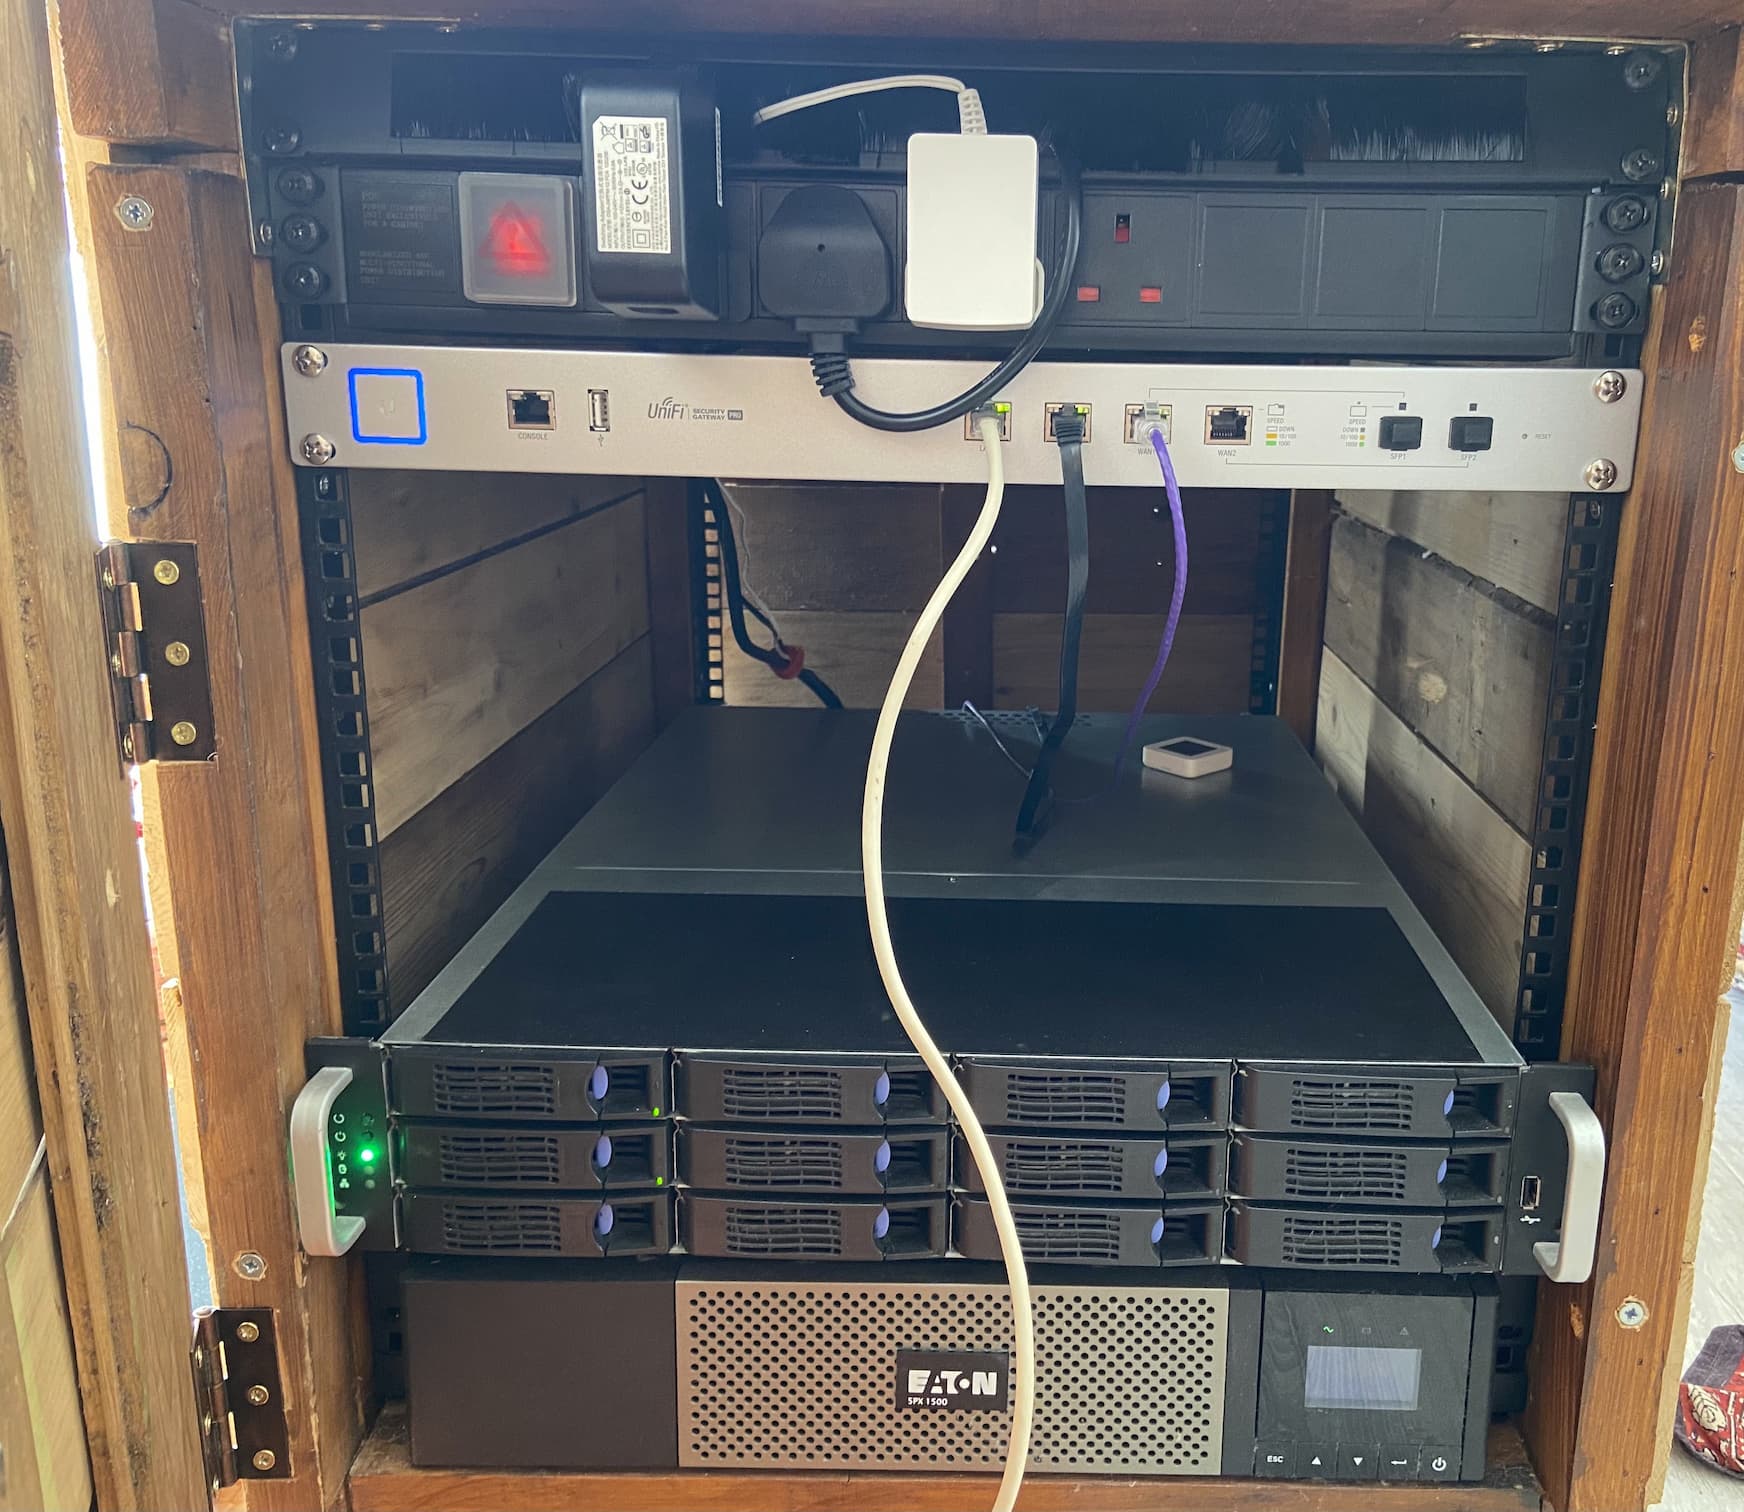 A final picture of how things have progressed after twelve months, showing the original UPS and server mounted within, as well as a bluetooth temperature sensor, a PDU, a Unifi Security Gateway Pro and a bunch of cables